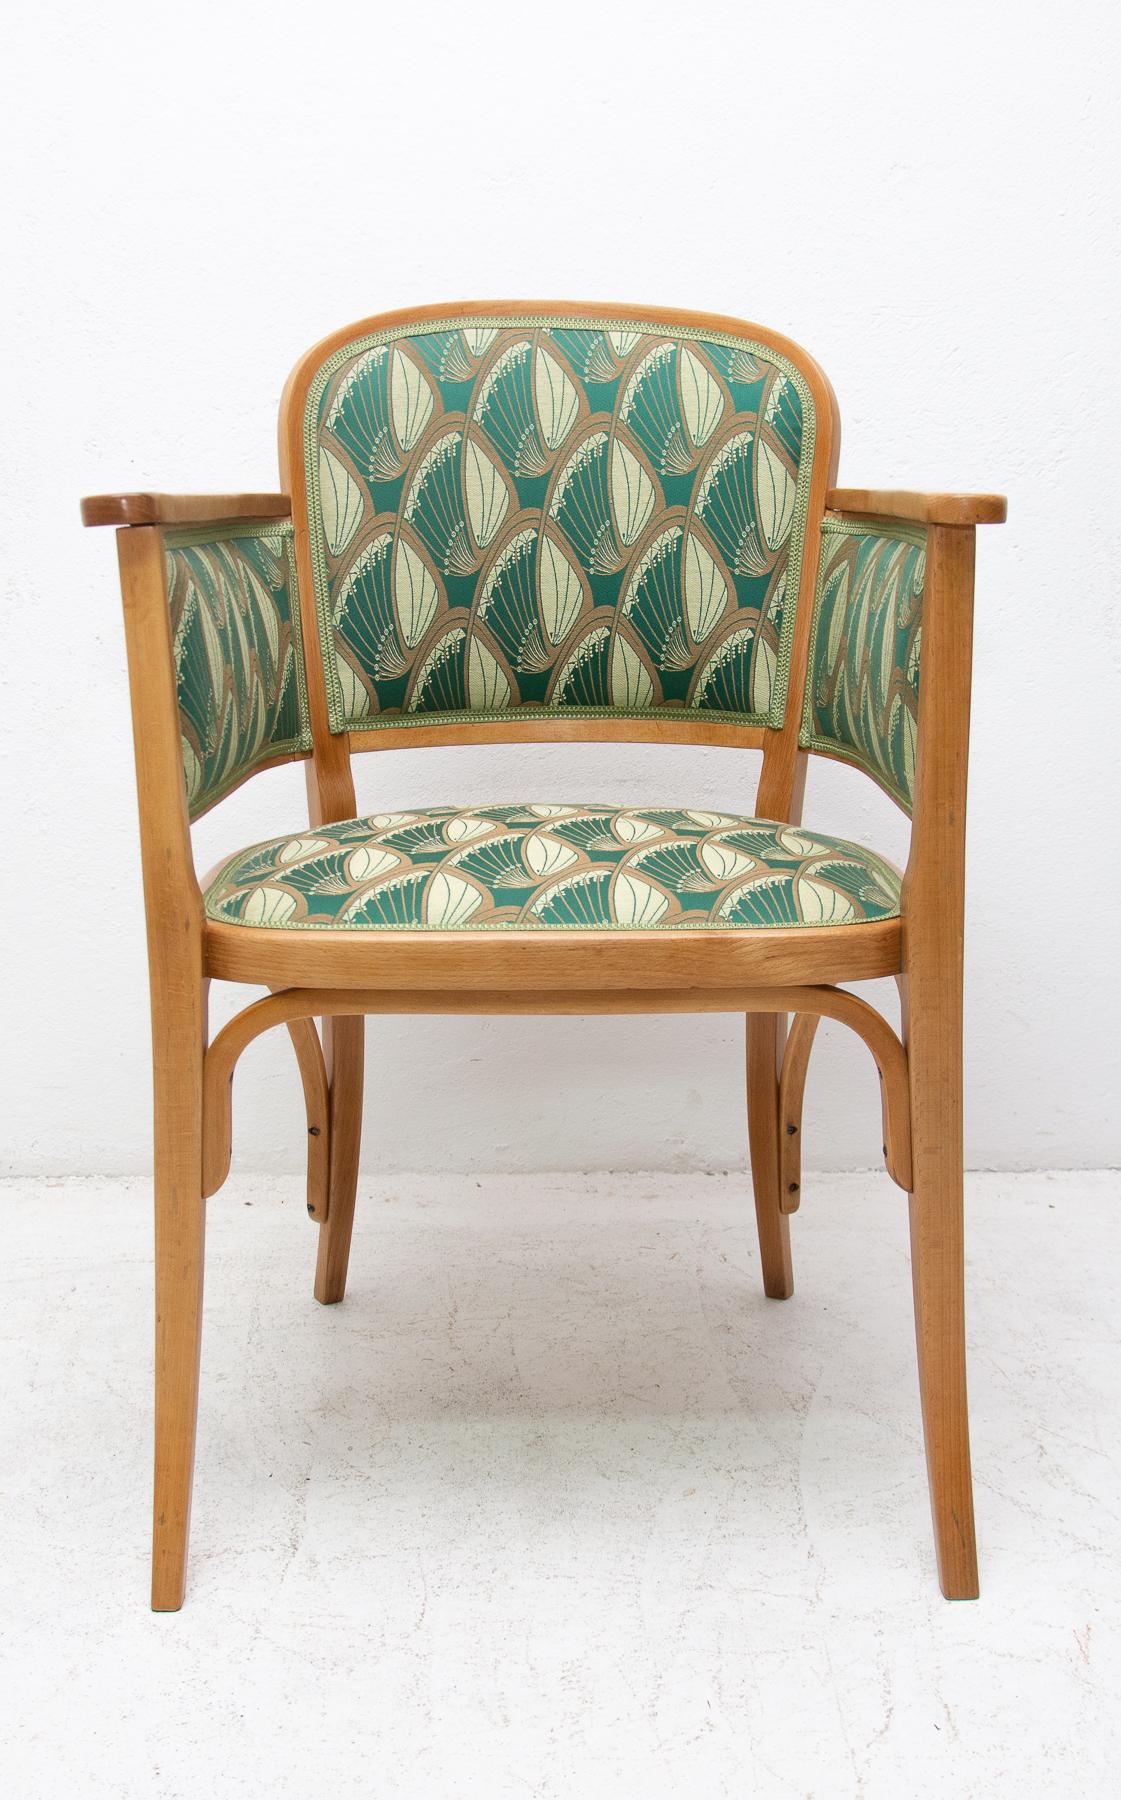 Office armchair, Viennese secession, circa 1910. Austria-Hungary. In our opinion, this was most likely designed by one of designers such as Otto Wagner, Gustav Siegel or Koloman Moser.
The chair is fully restored, has a new upholstery.
Made of the